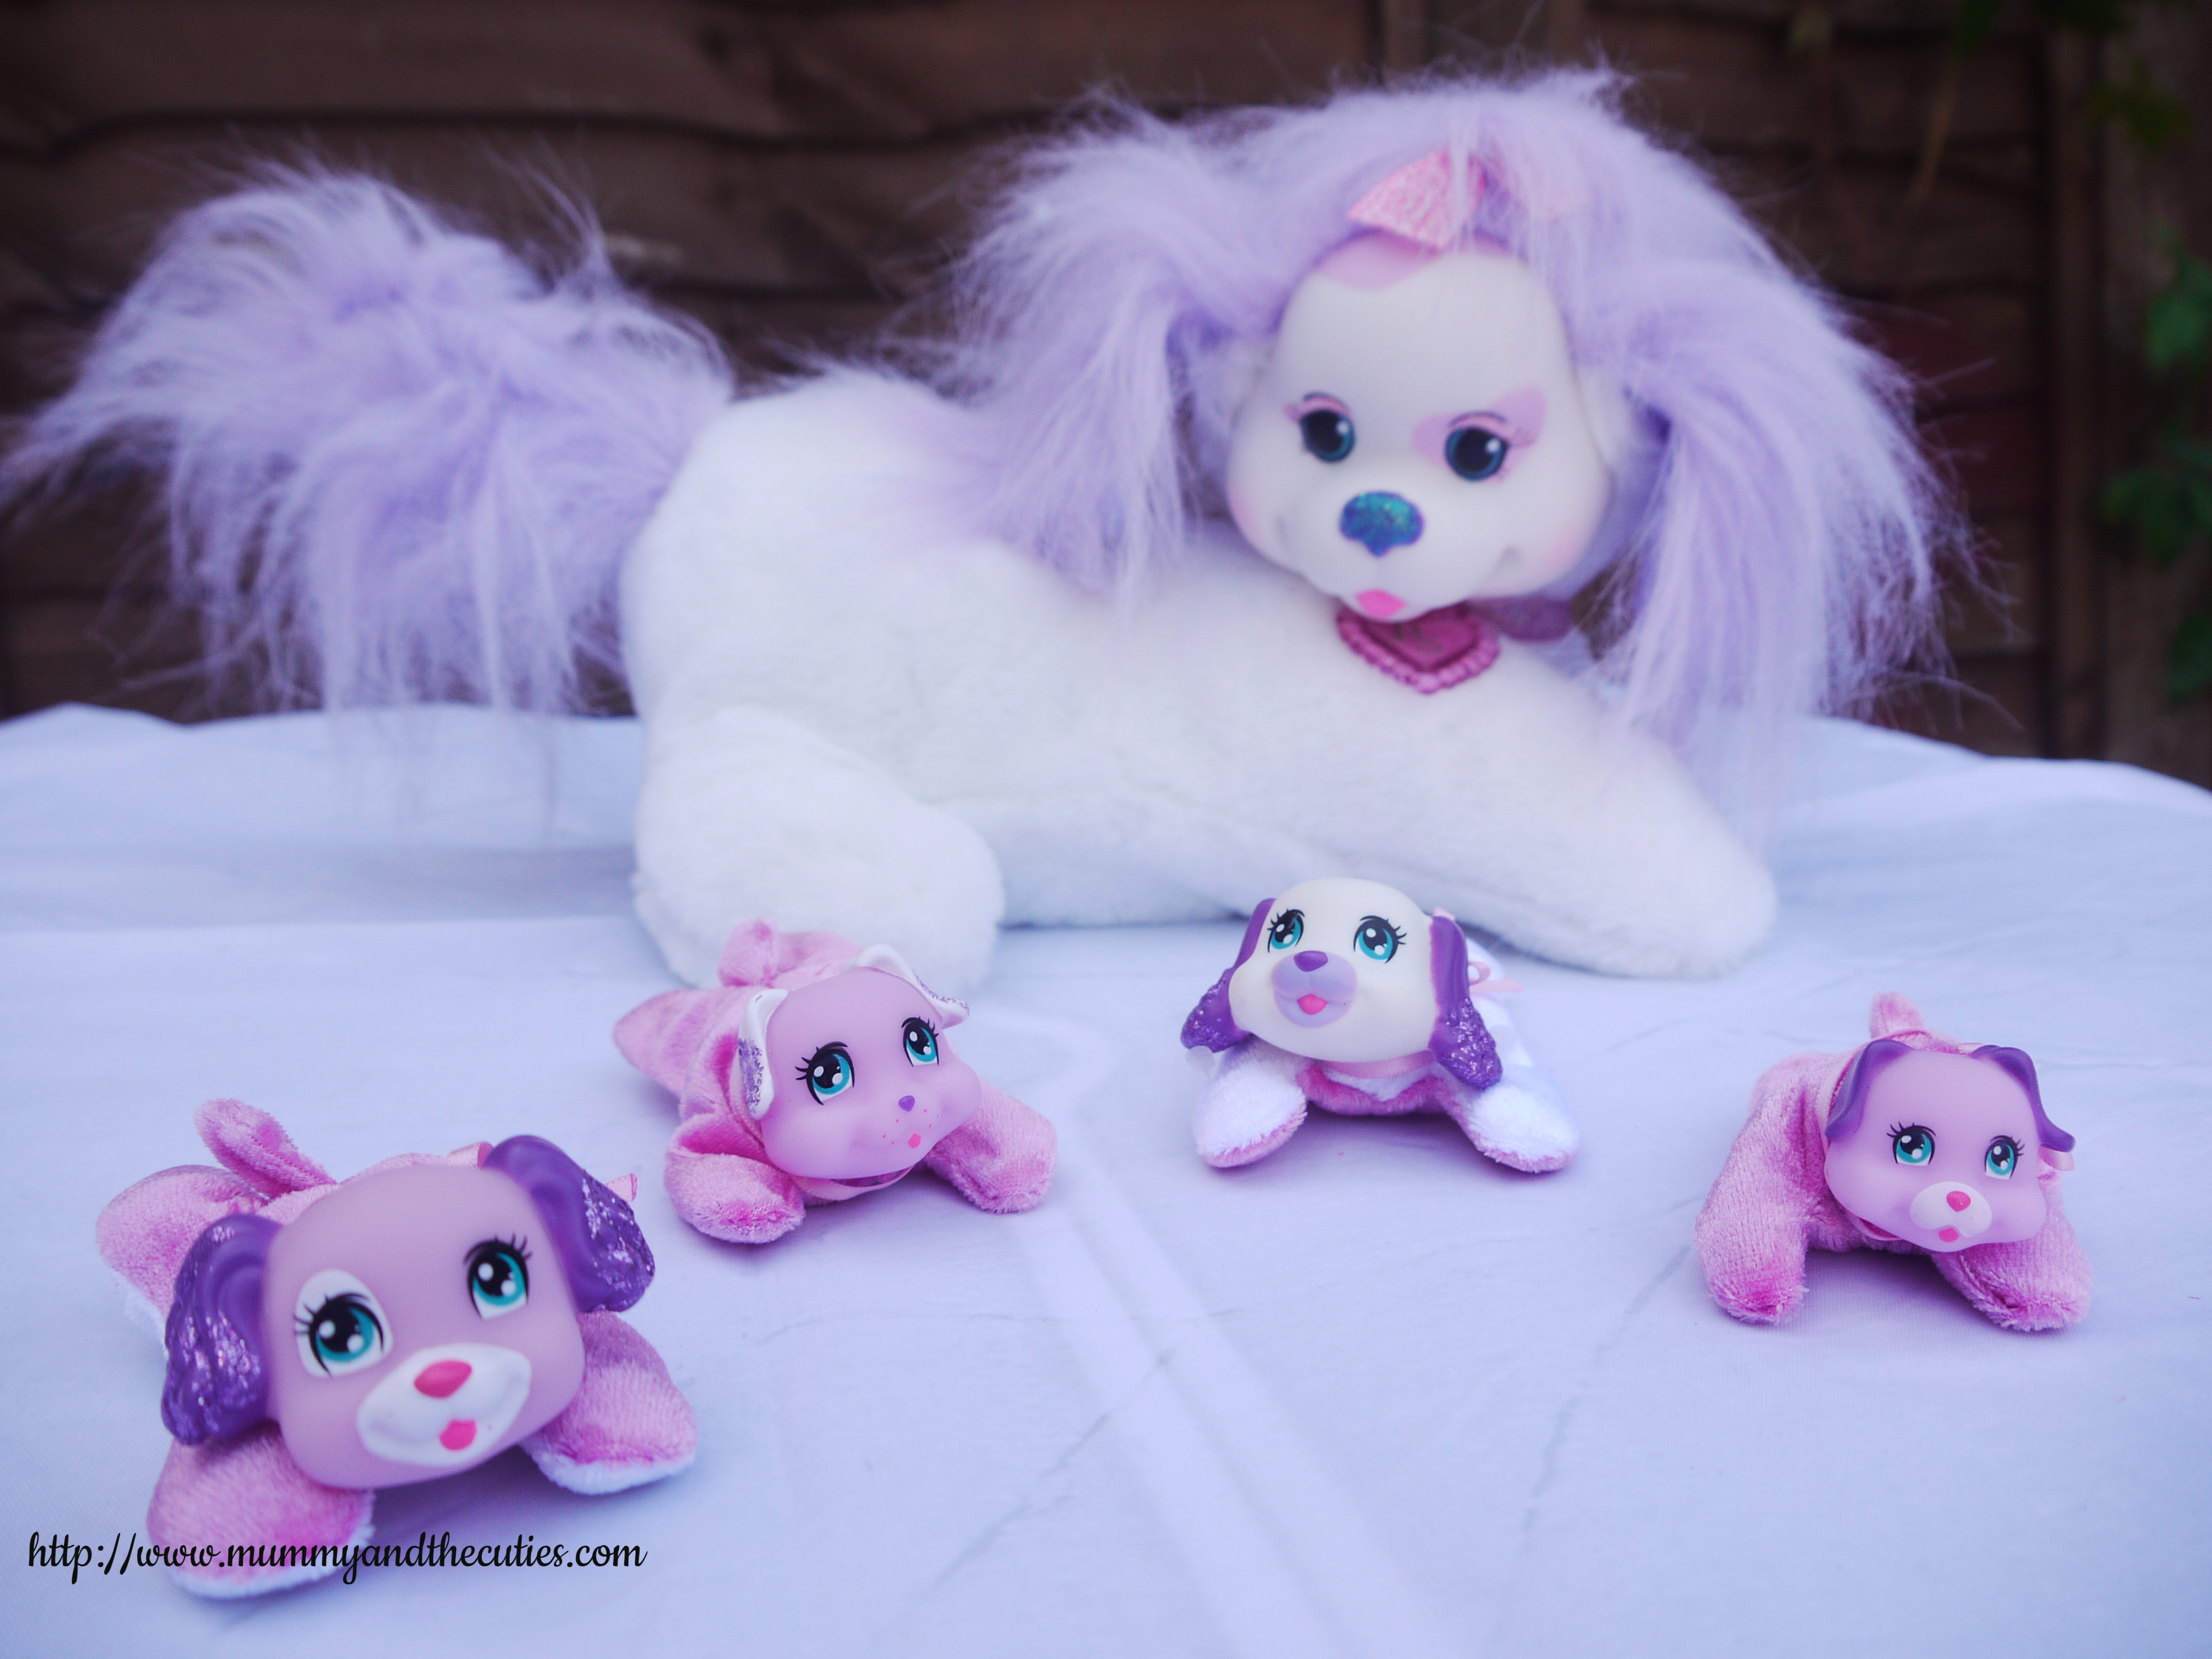 Introducing – Cali Puppy Surprise Plush and her puppies